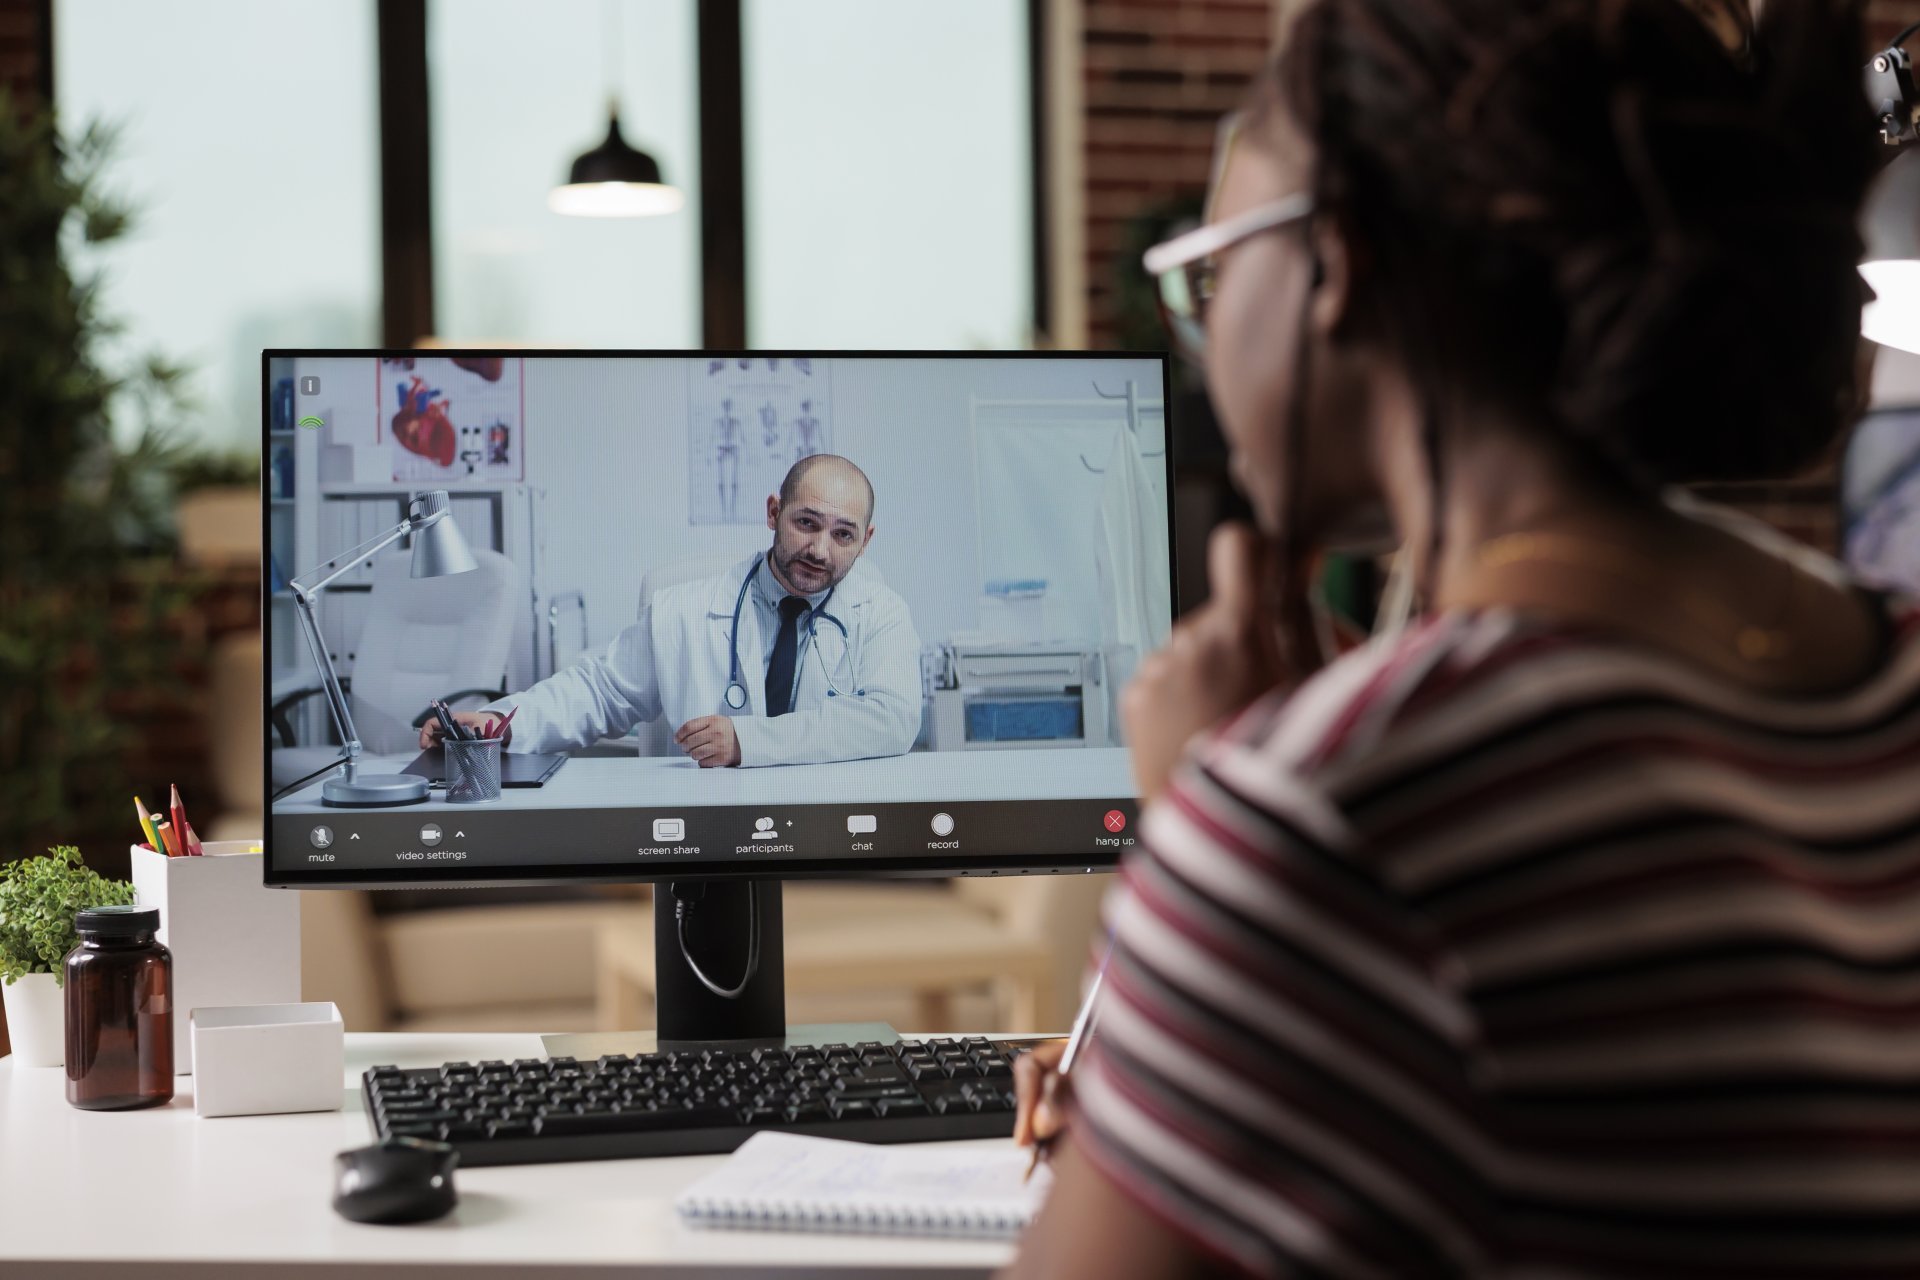 A patient speaks with her doctor via video call during a virtual appointment.